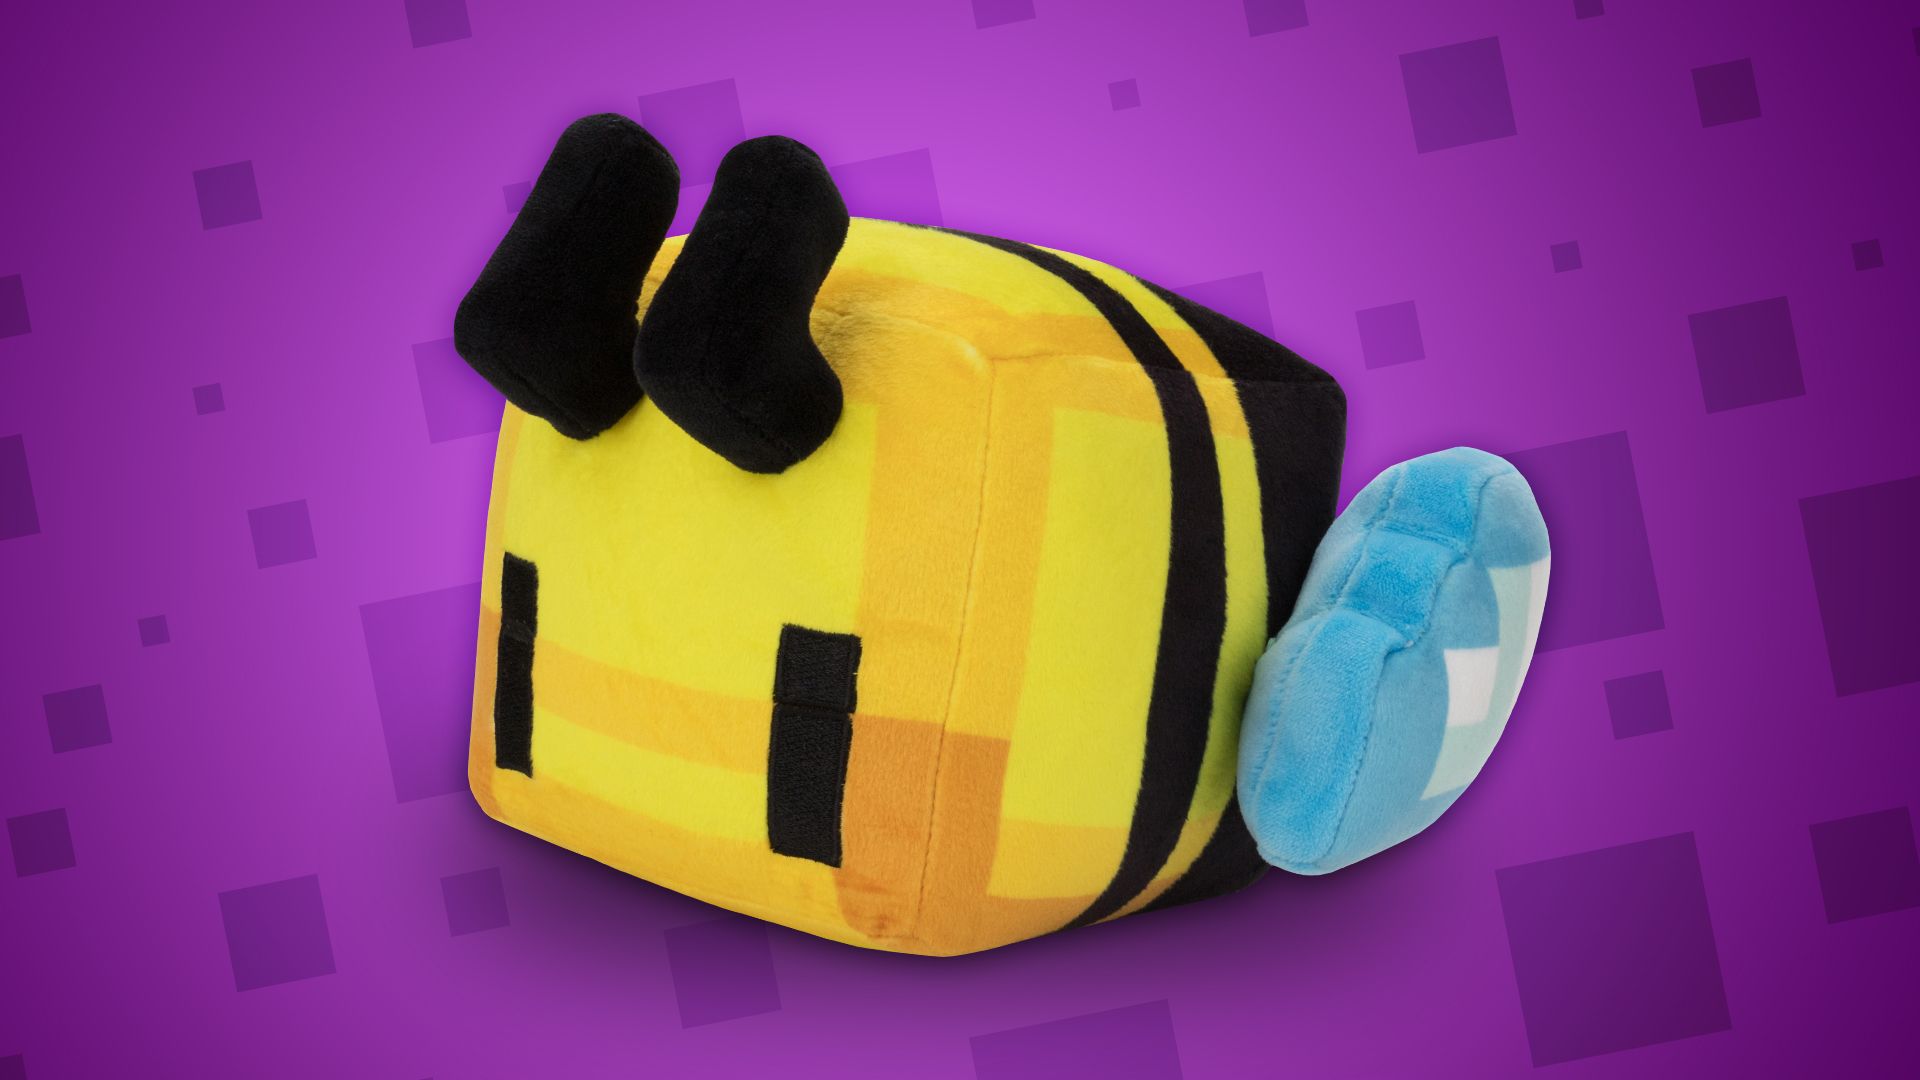 Image of the Cubee plush. A cube-shaped bee, made of bright yellows, oranges and black stripes.